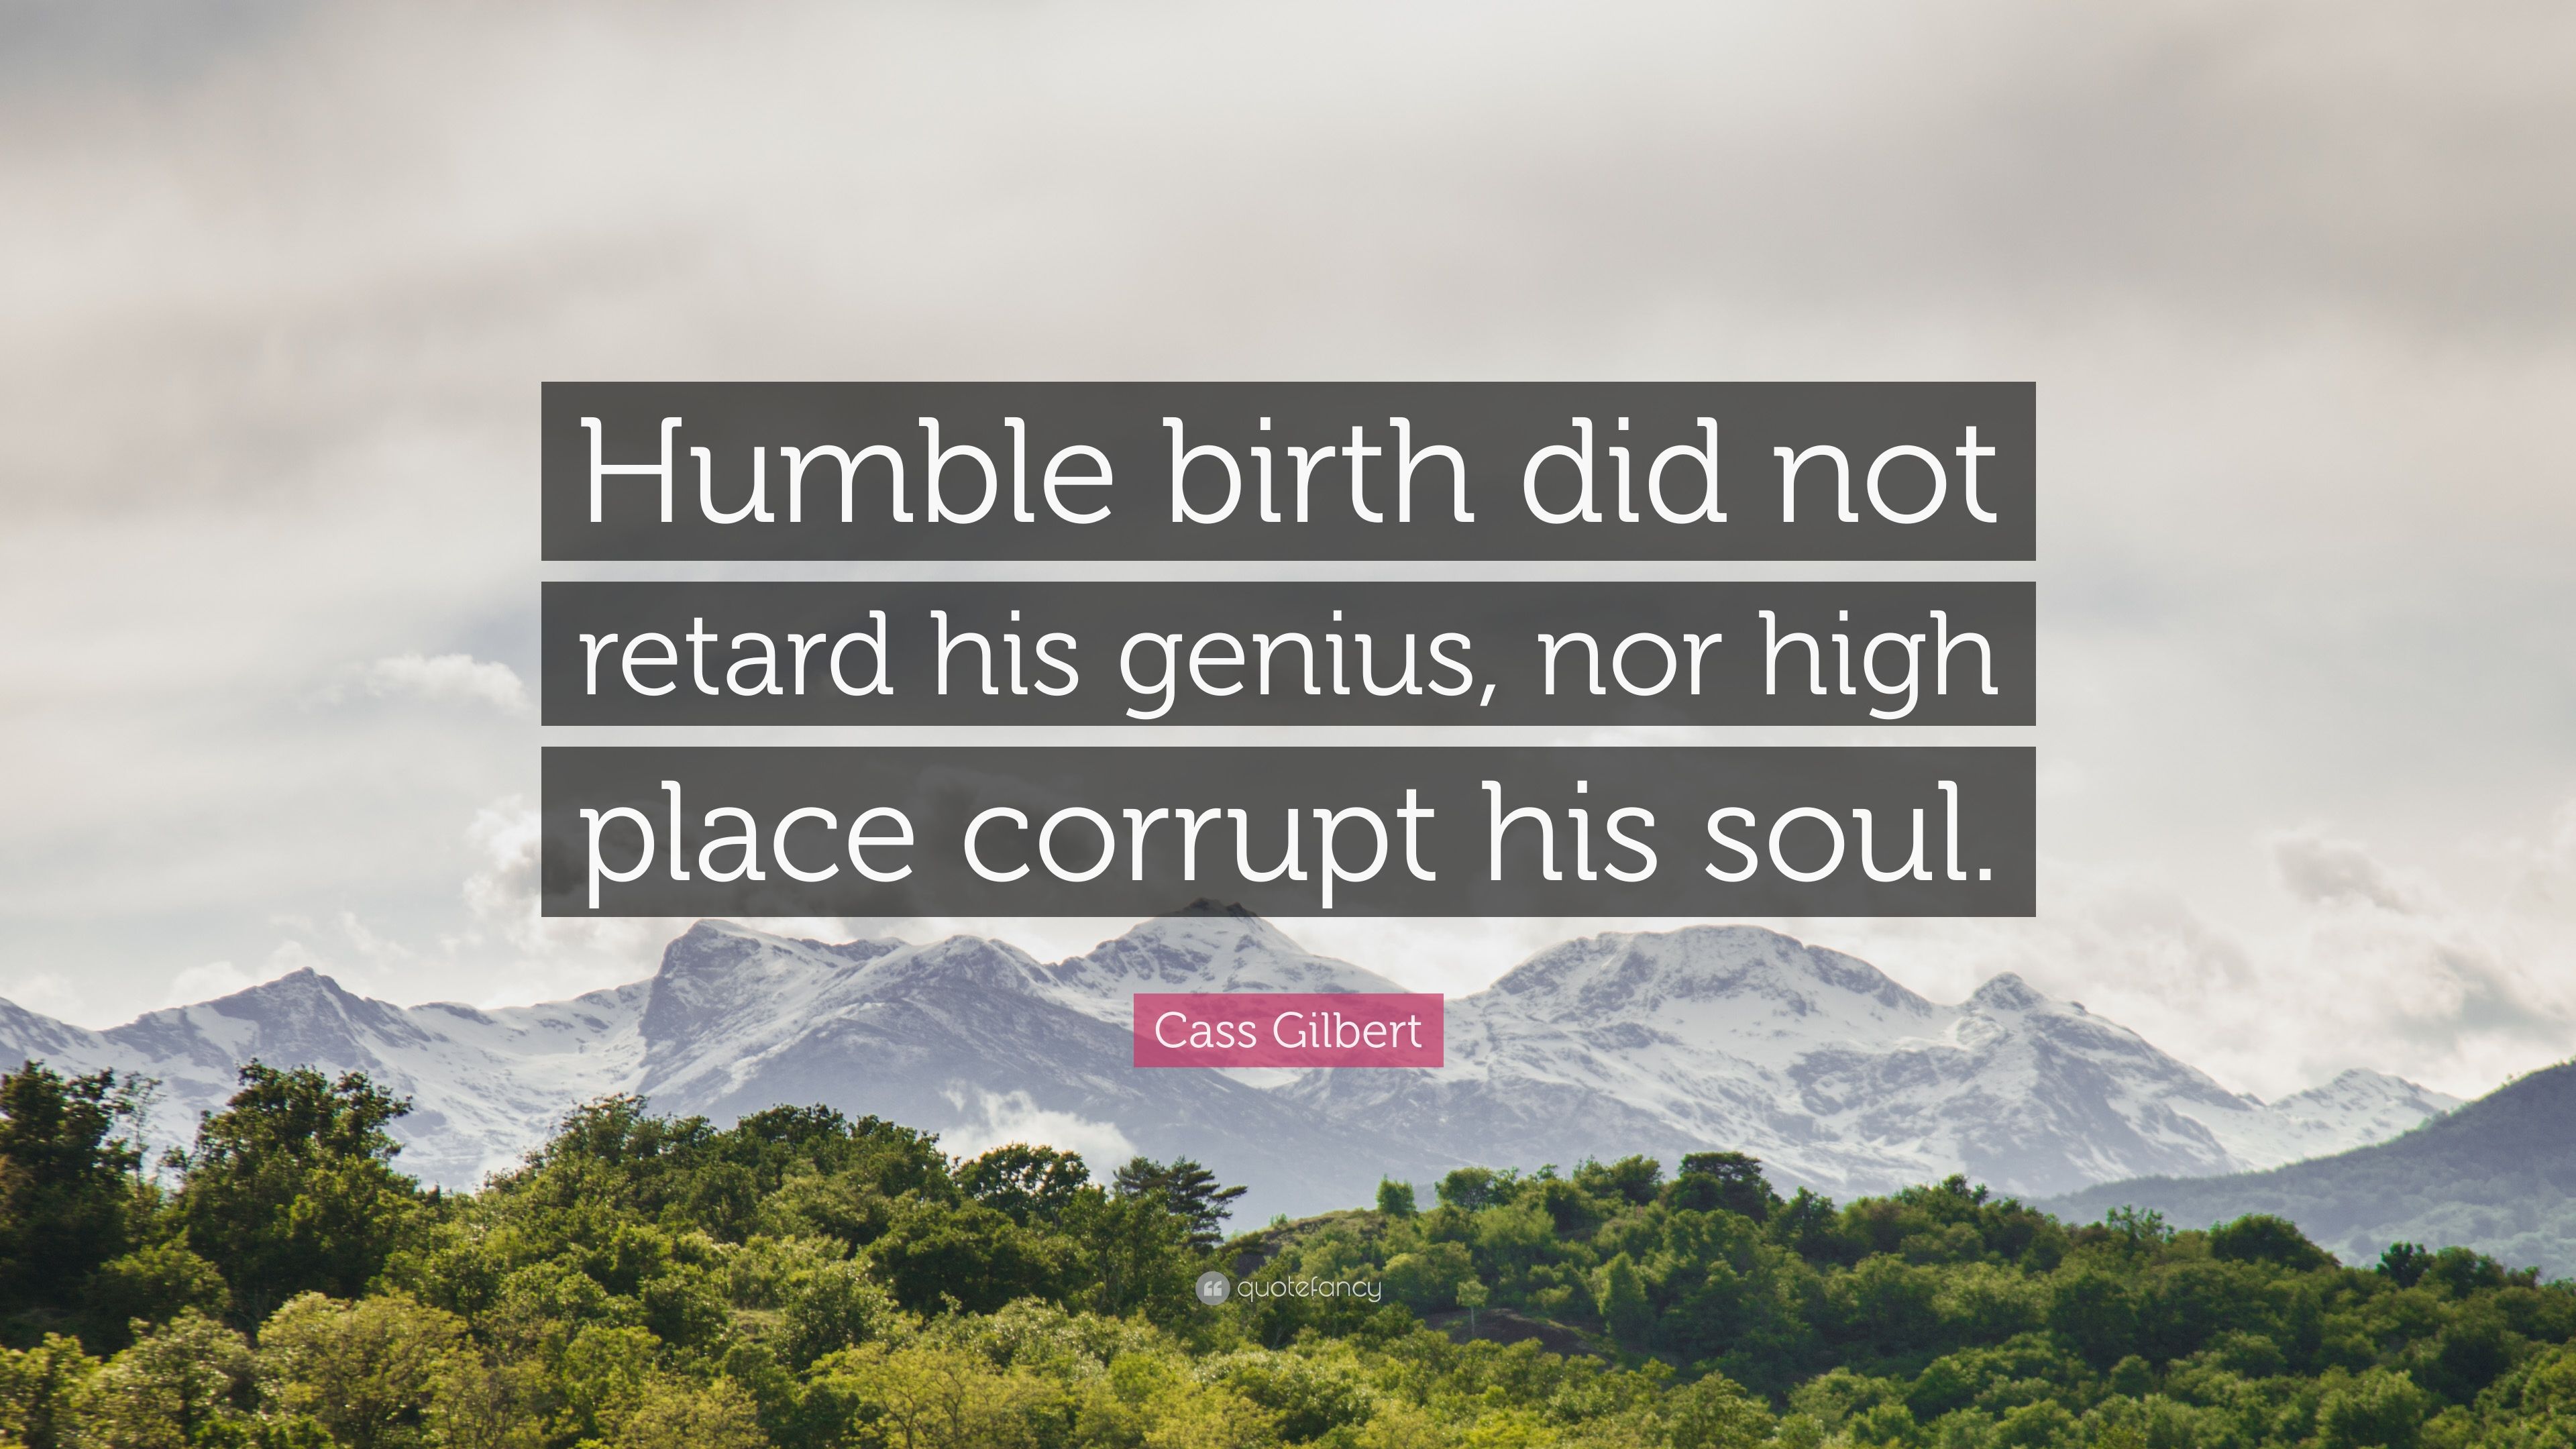 Cass Gilbert Quote: “Humble birth did not retard his genius, nor